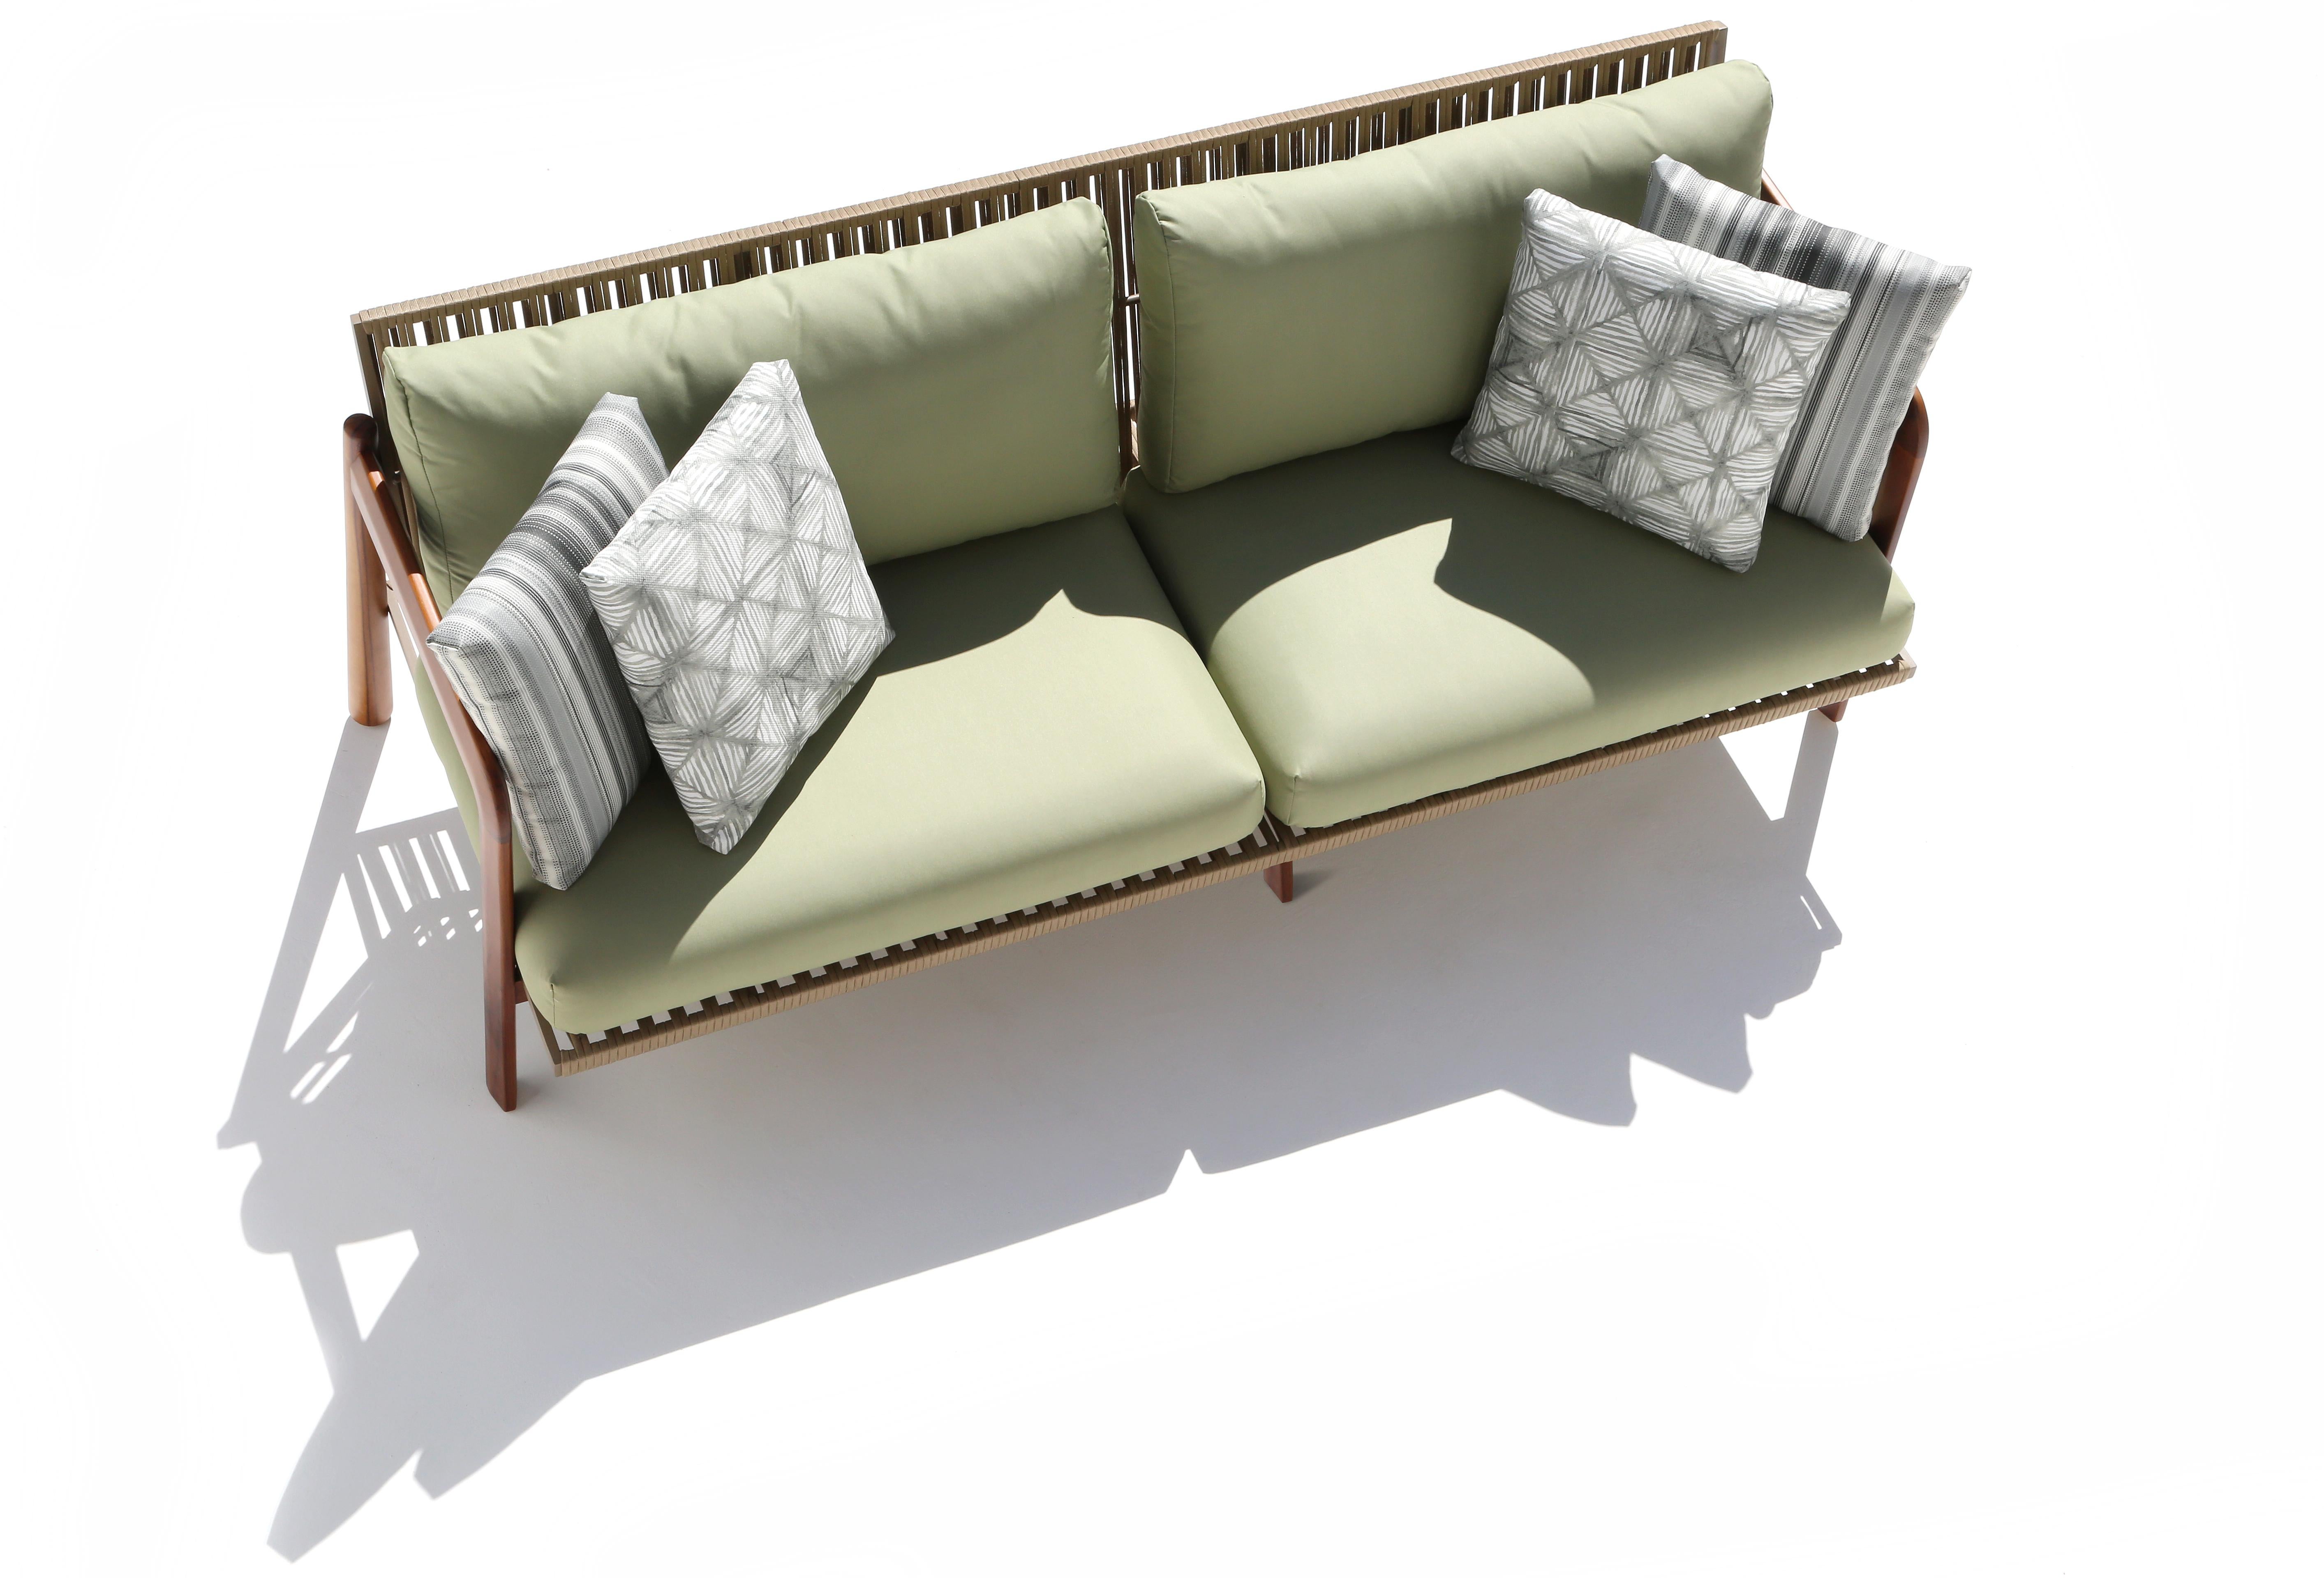 Classic and sophisticated design, by the mix of the materials.
The Sancho Couch can be used in both indoor and outdoor areas.
Its structure is produced in natural naval teak wood (brazilian reforested wood). The aluminum have a special revolver with